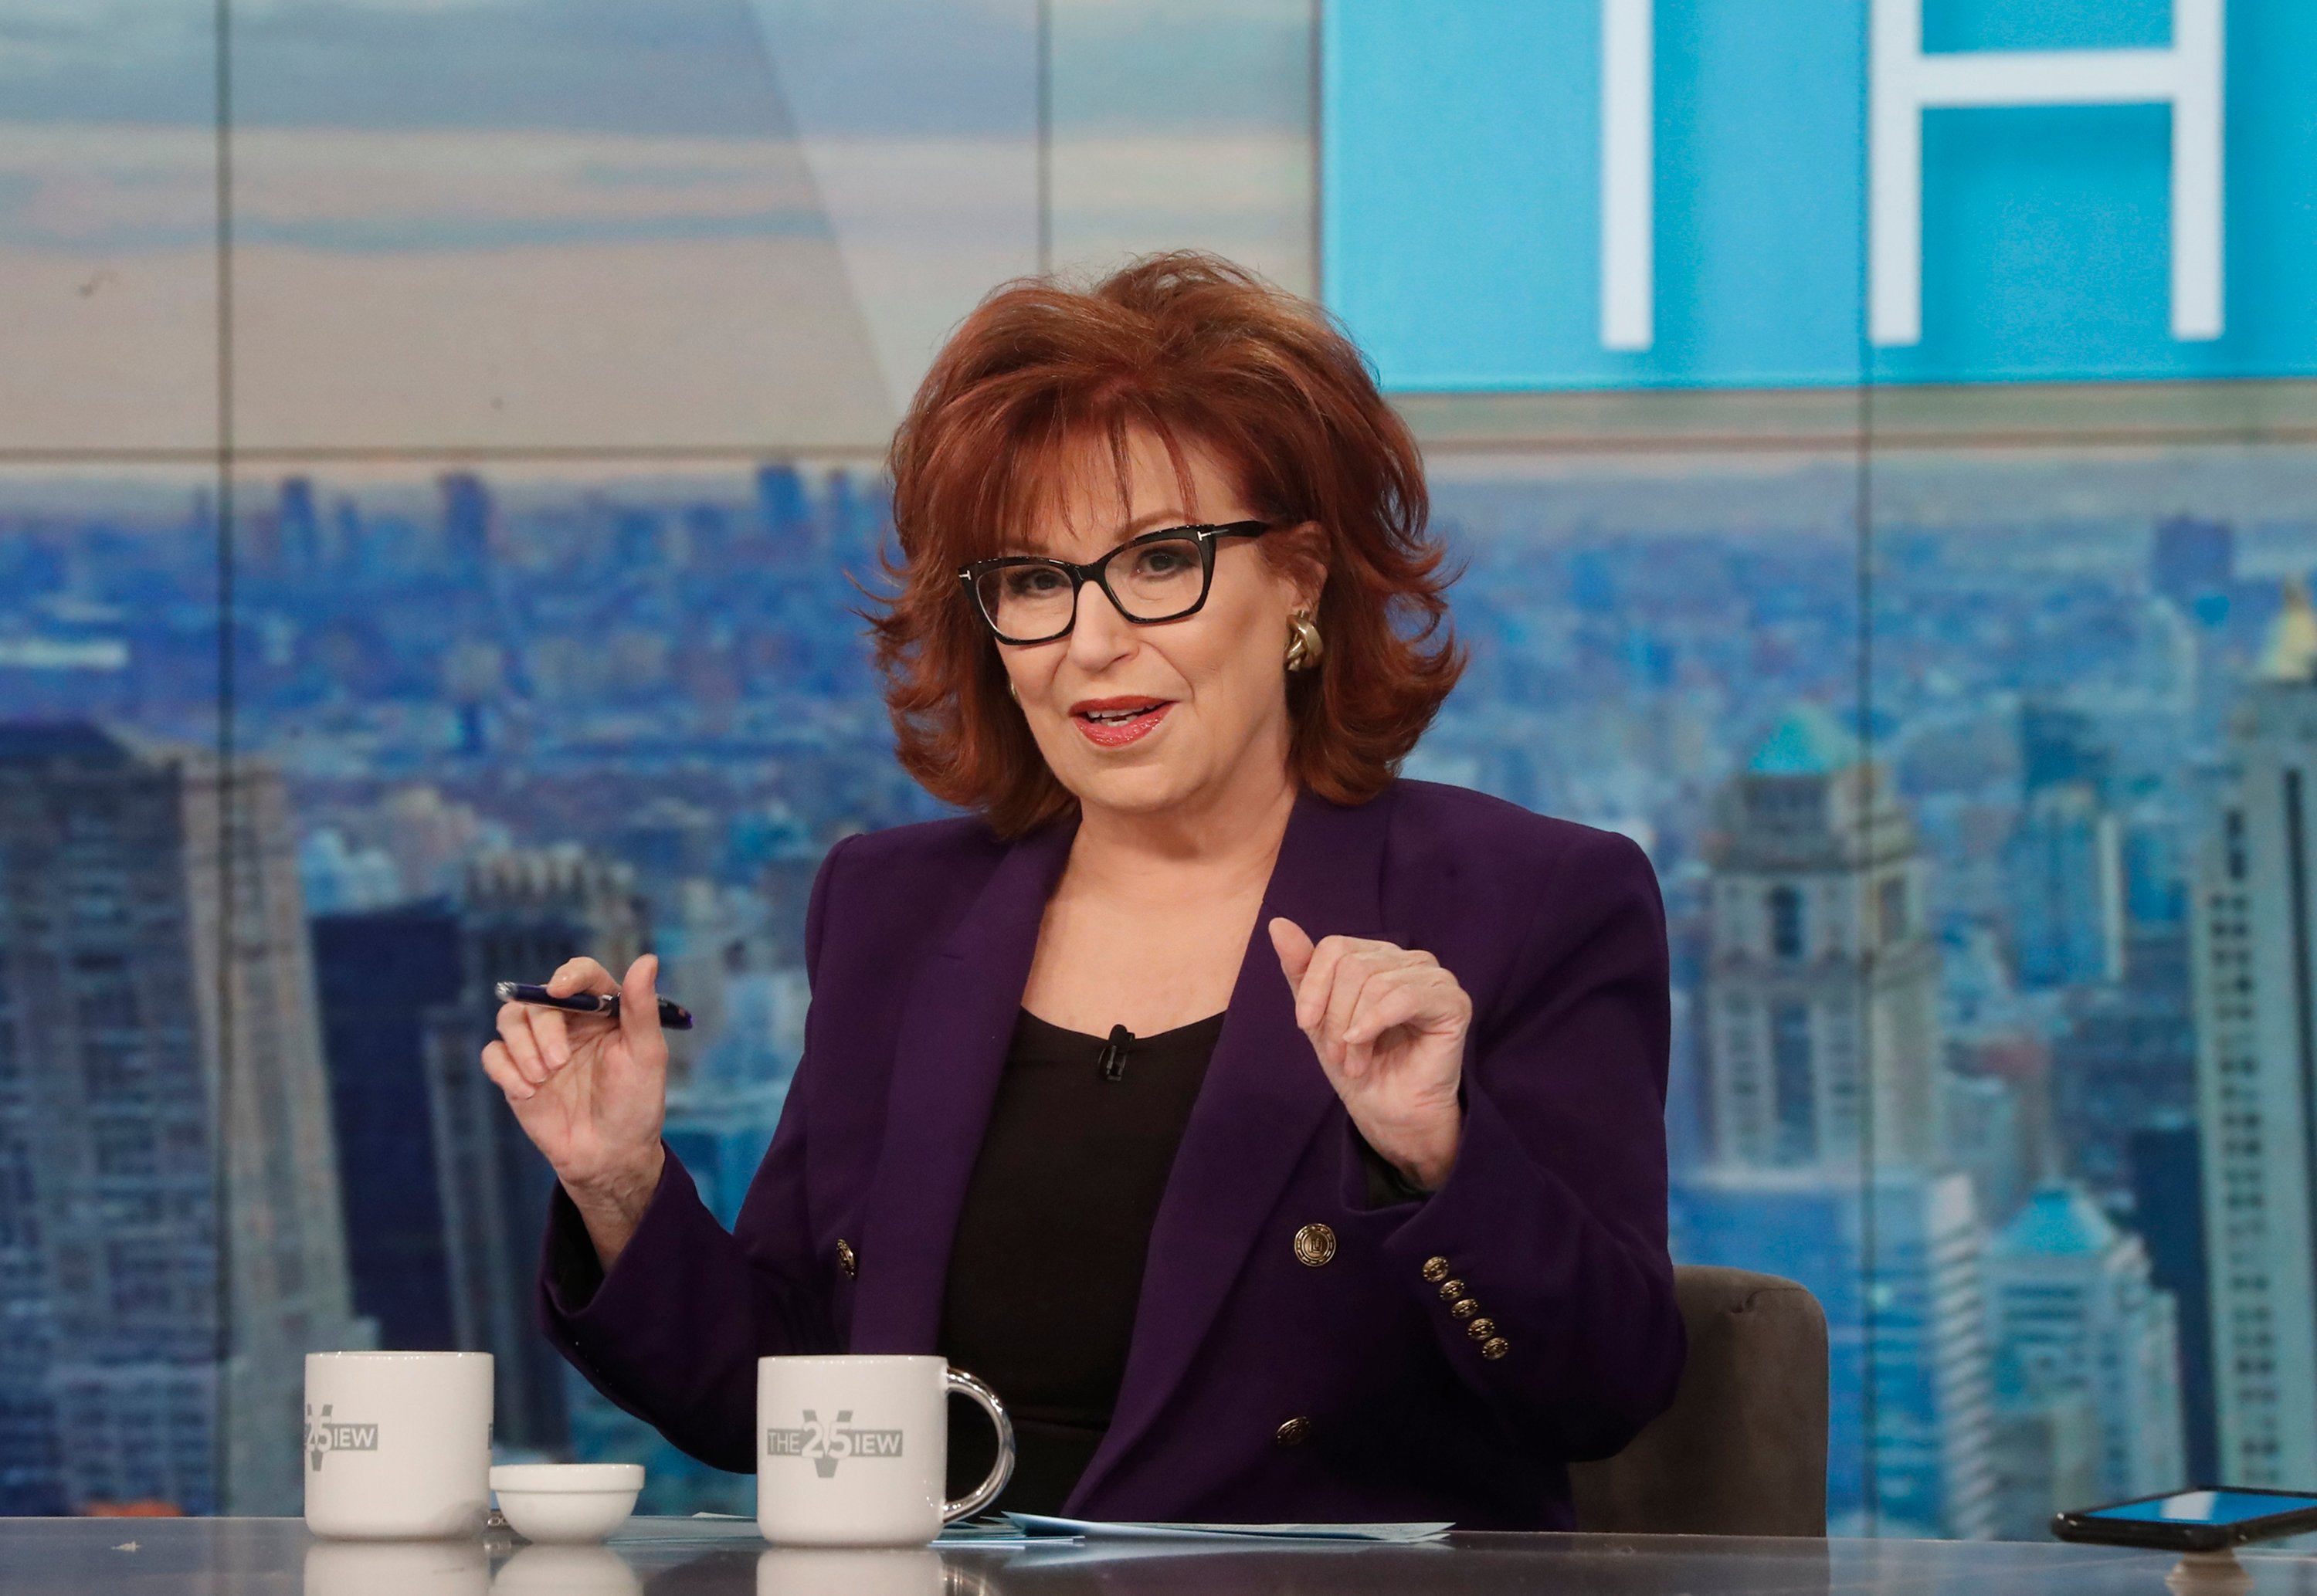 Joy Behar in the middle of a debate, wearing a purple blazer and black blouse on the set of 'The View'